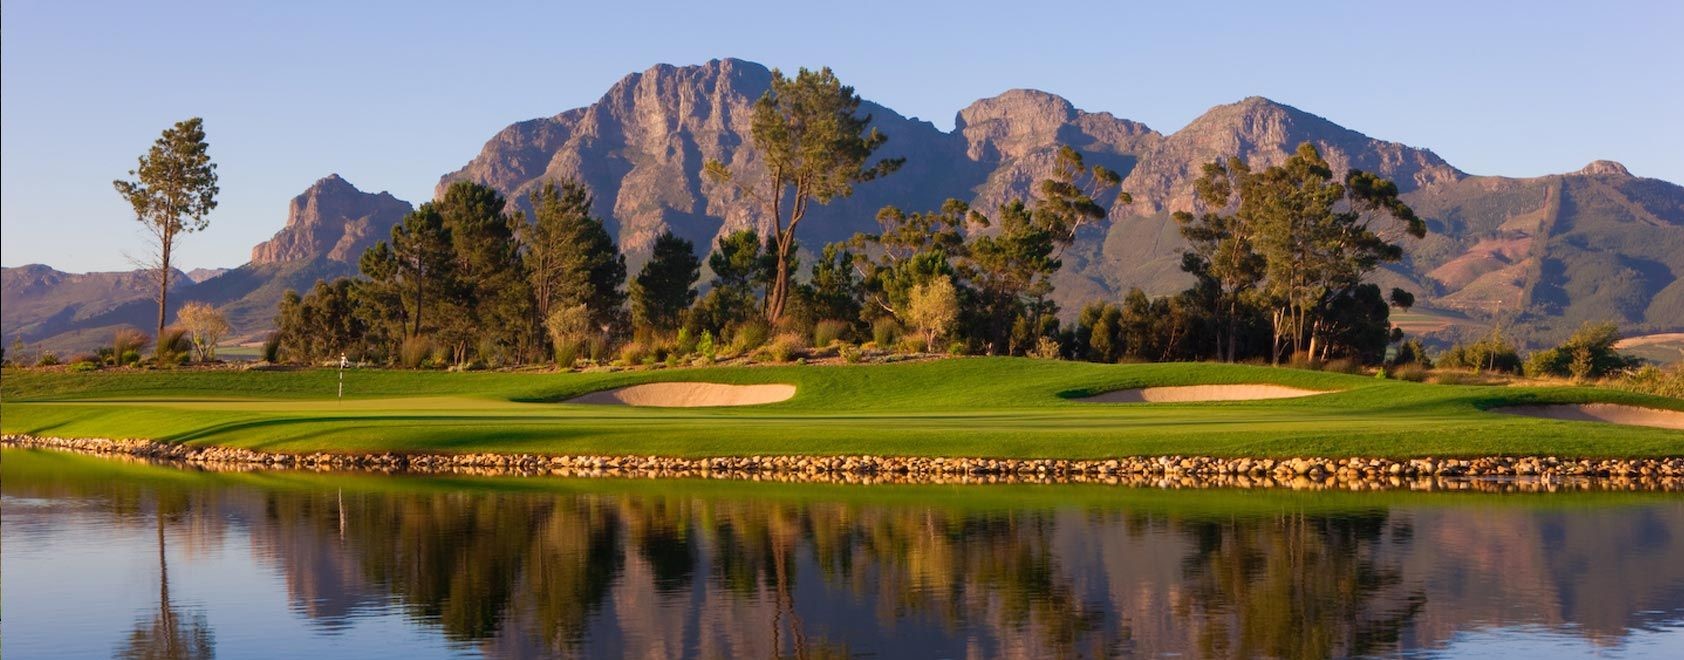 Cape Town området, Sydafrika, Pearl Valley Golf Course